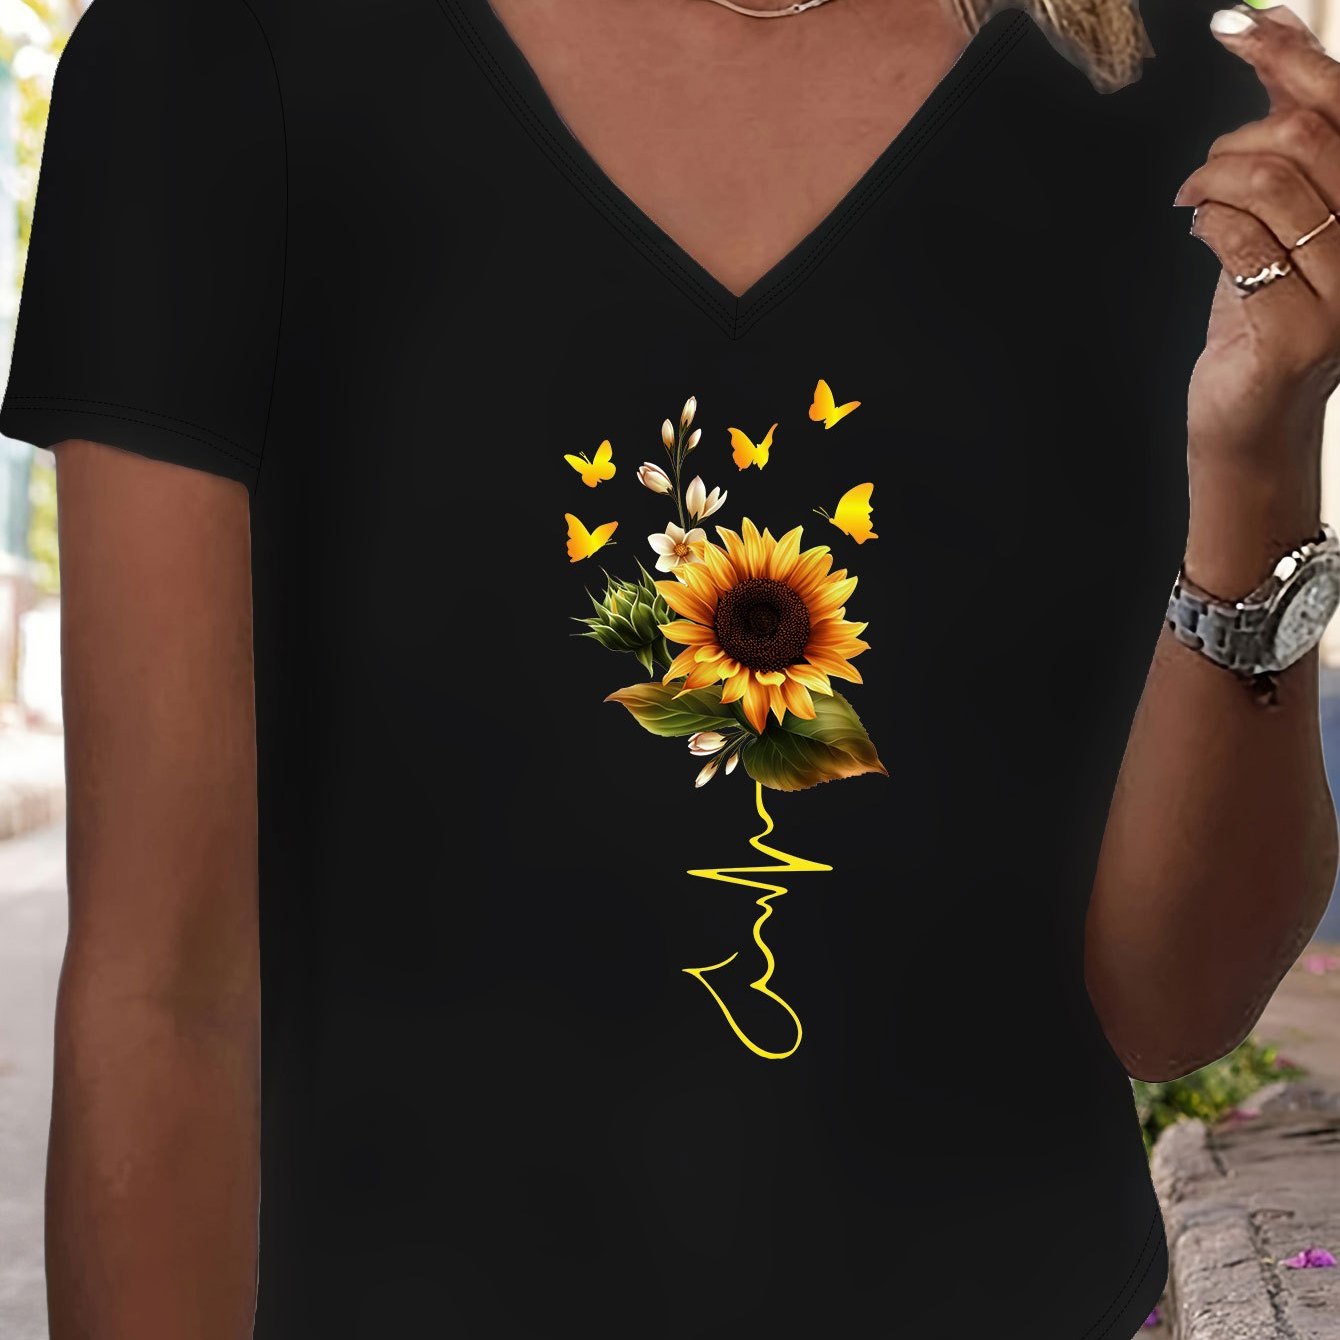 

Sunflower Graphic Print T-shirt, Casual Short Sleeve V Neck Top For Spring & Summer, Women's Clothing